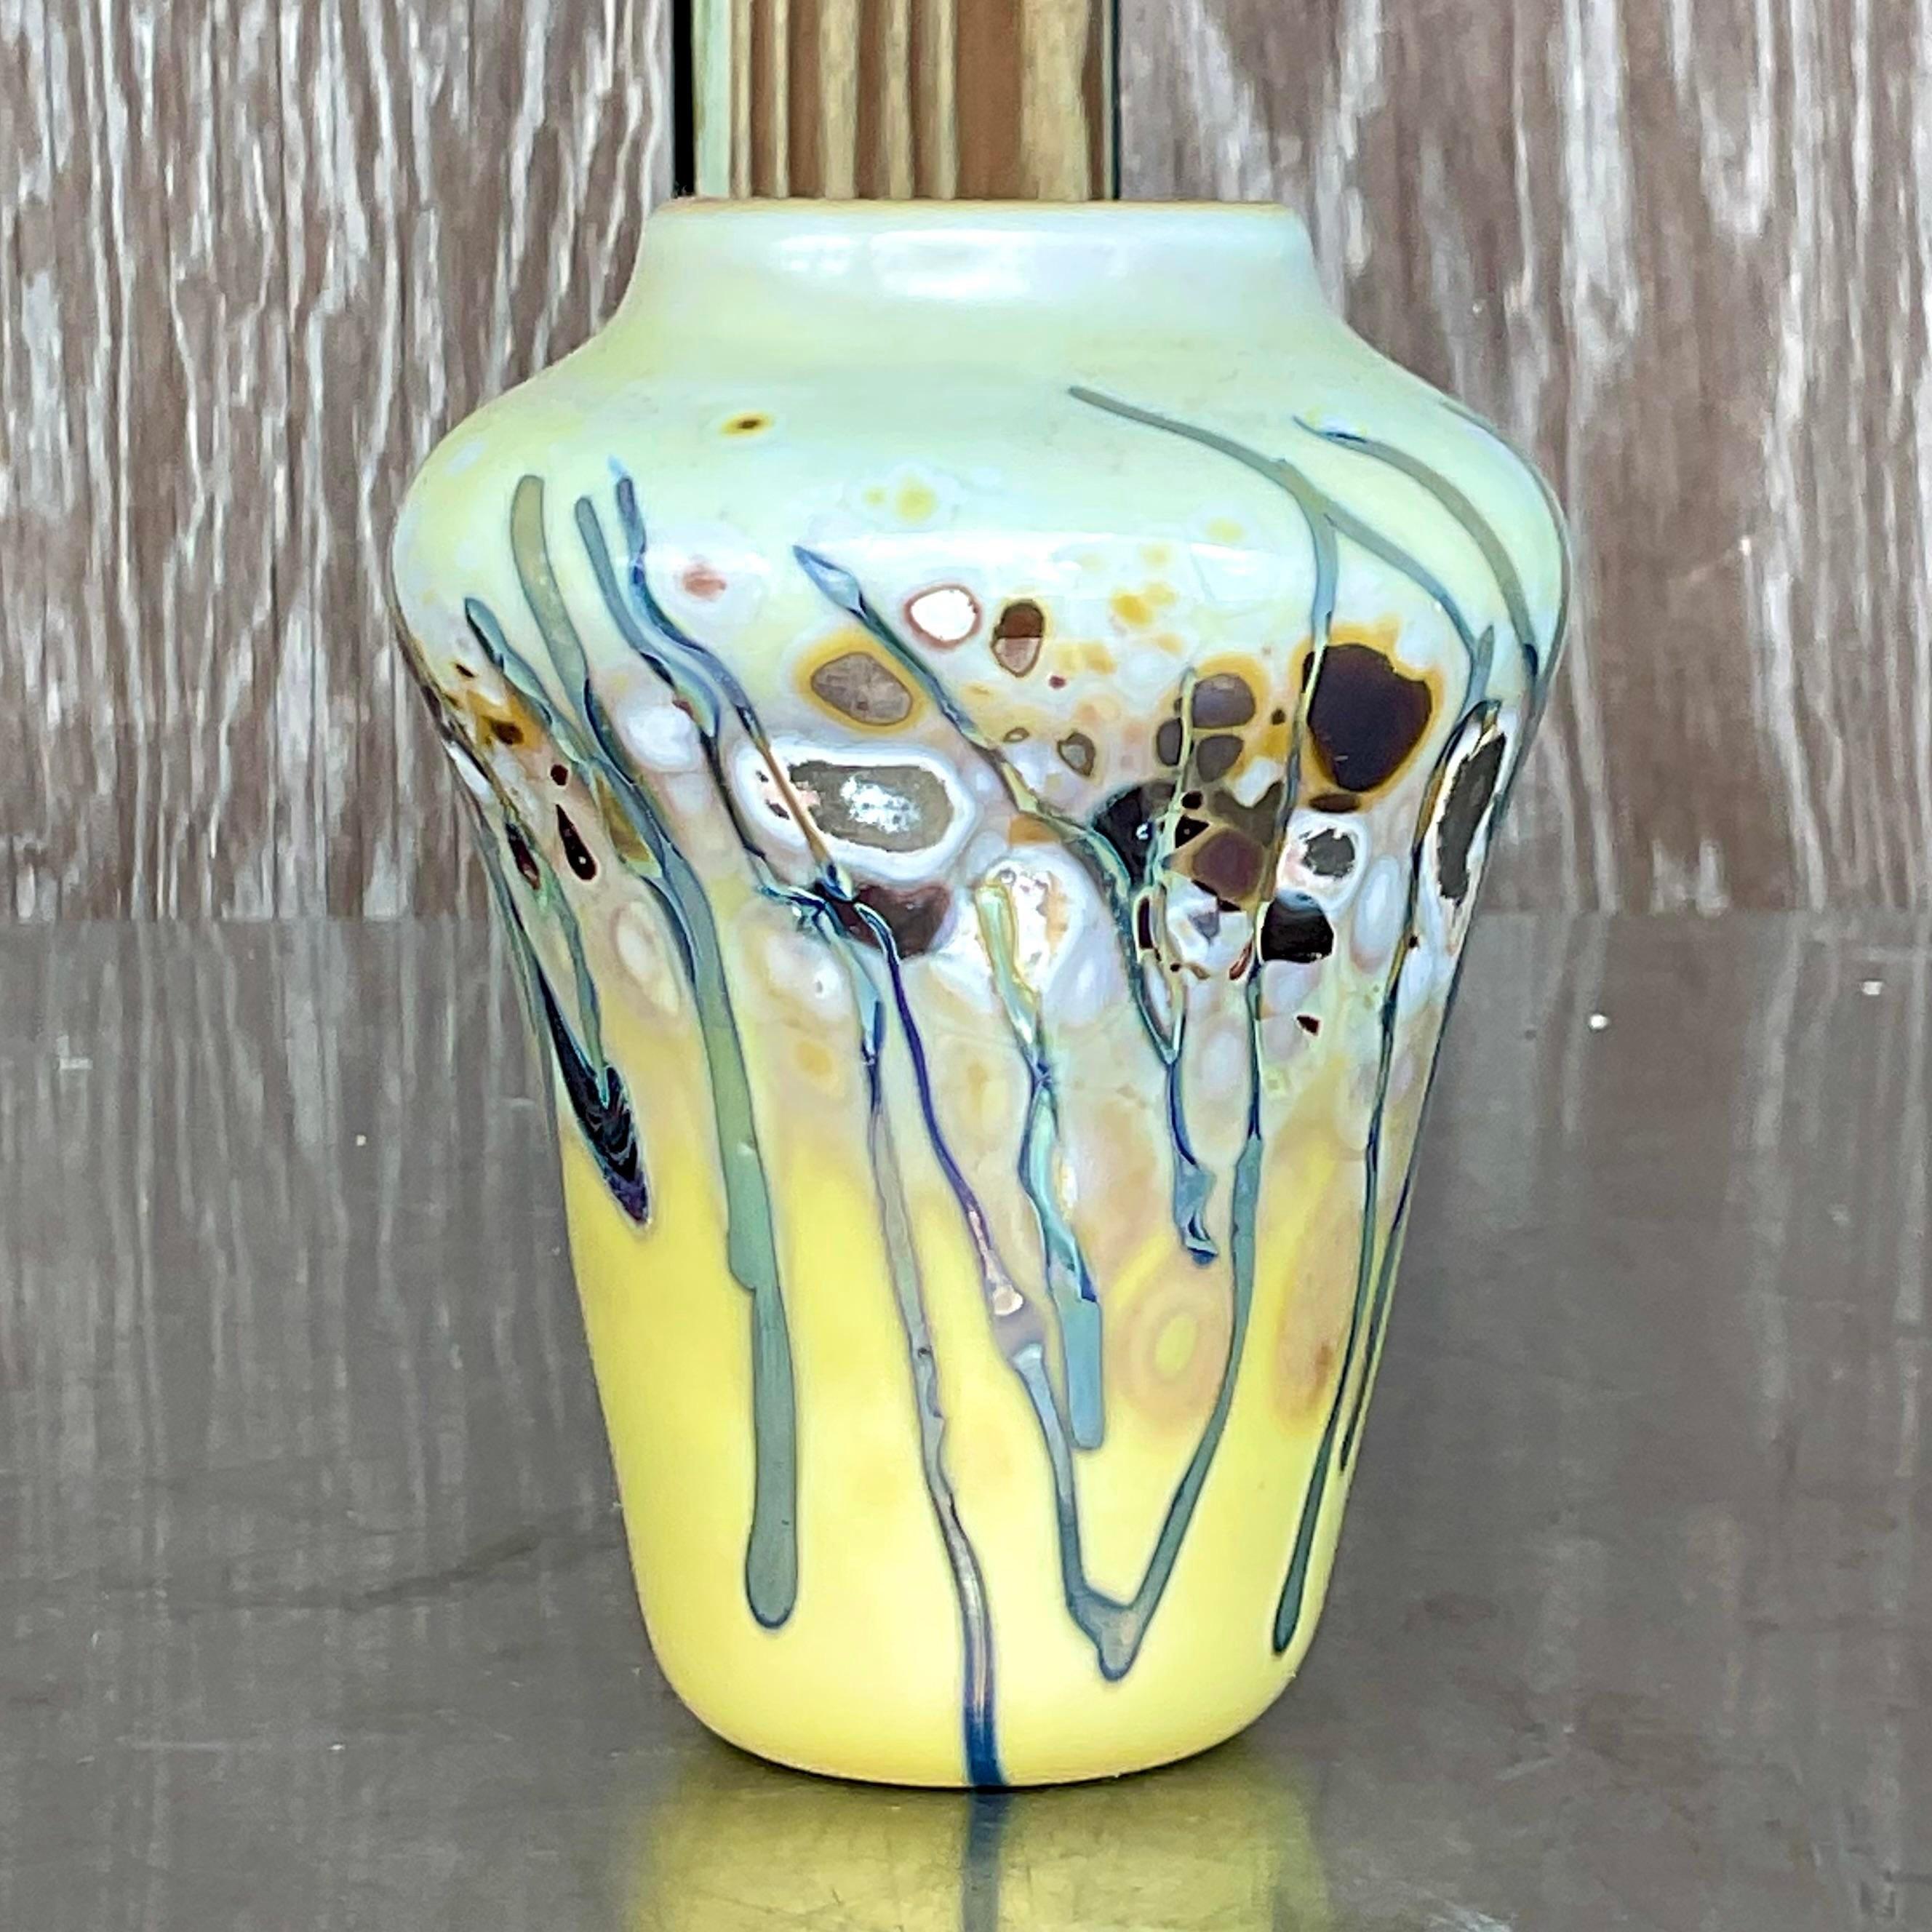 A stunning vintage Boho vase. A chic abstract composition rendered in glass. Beautiful pale coloration. Acquired from a Palm Beach estate.